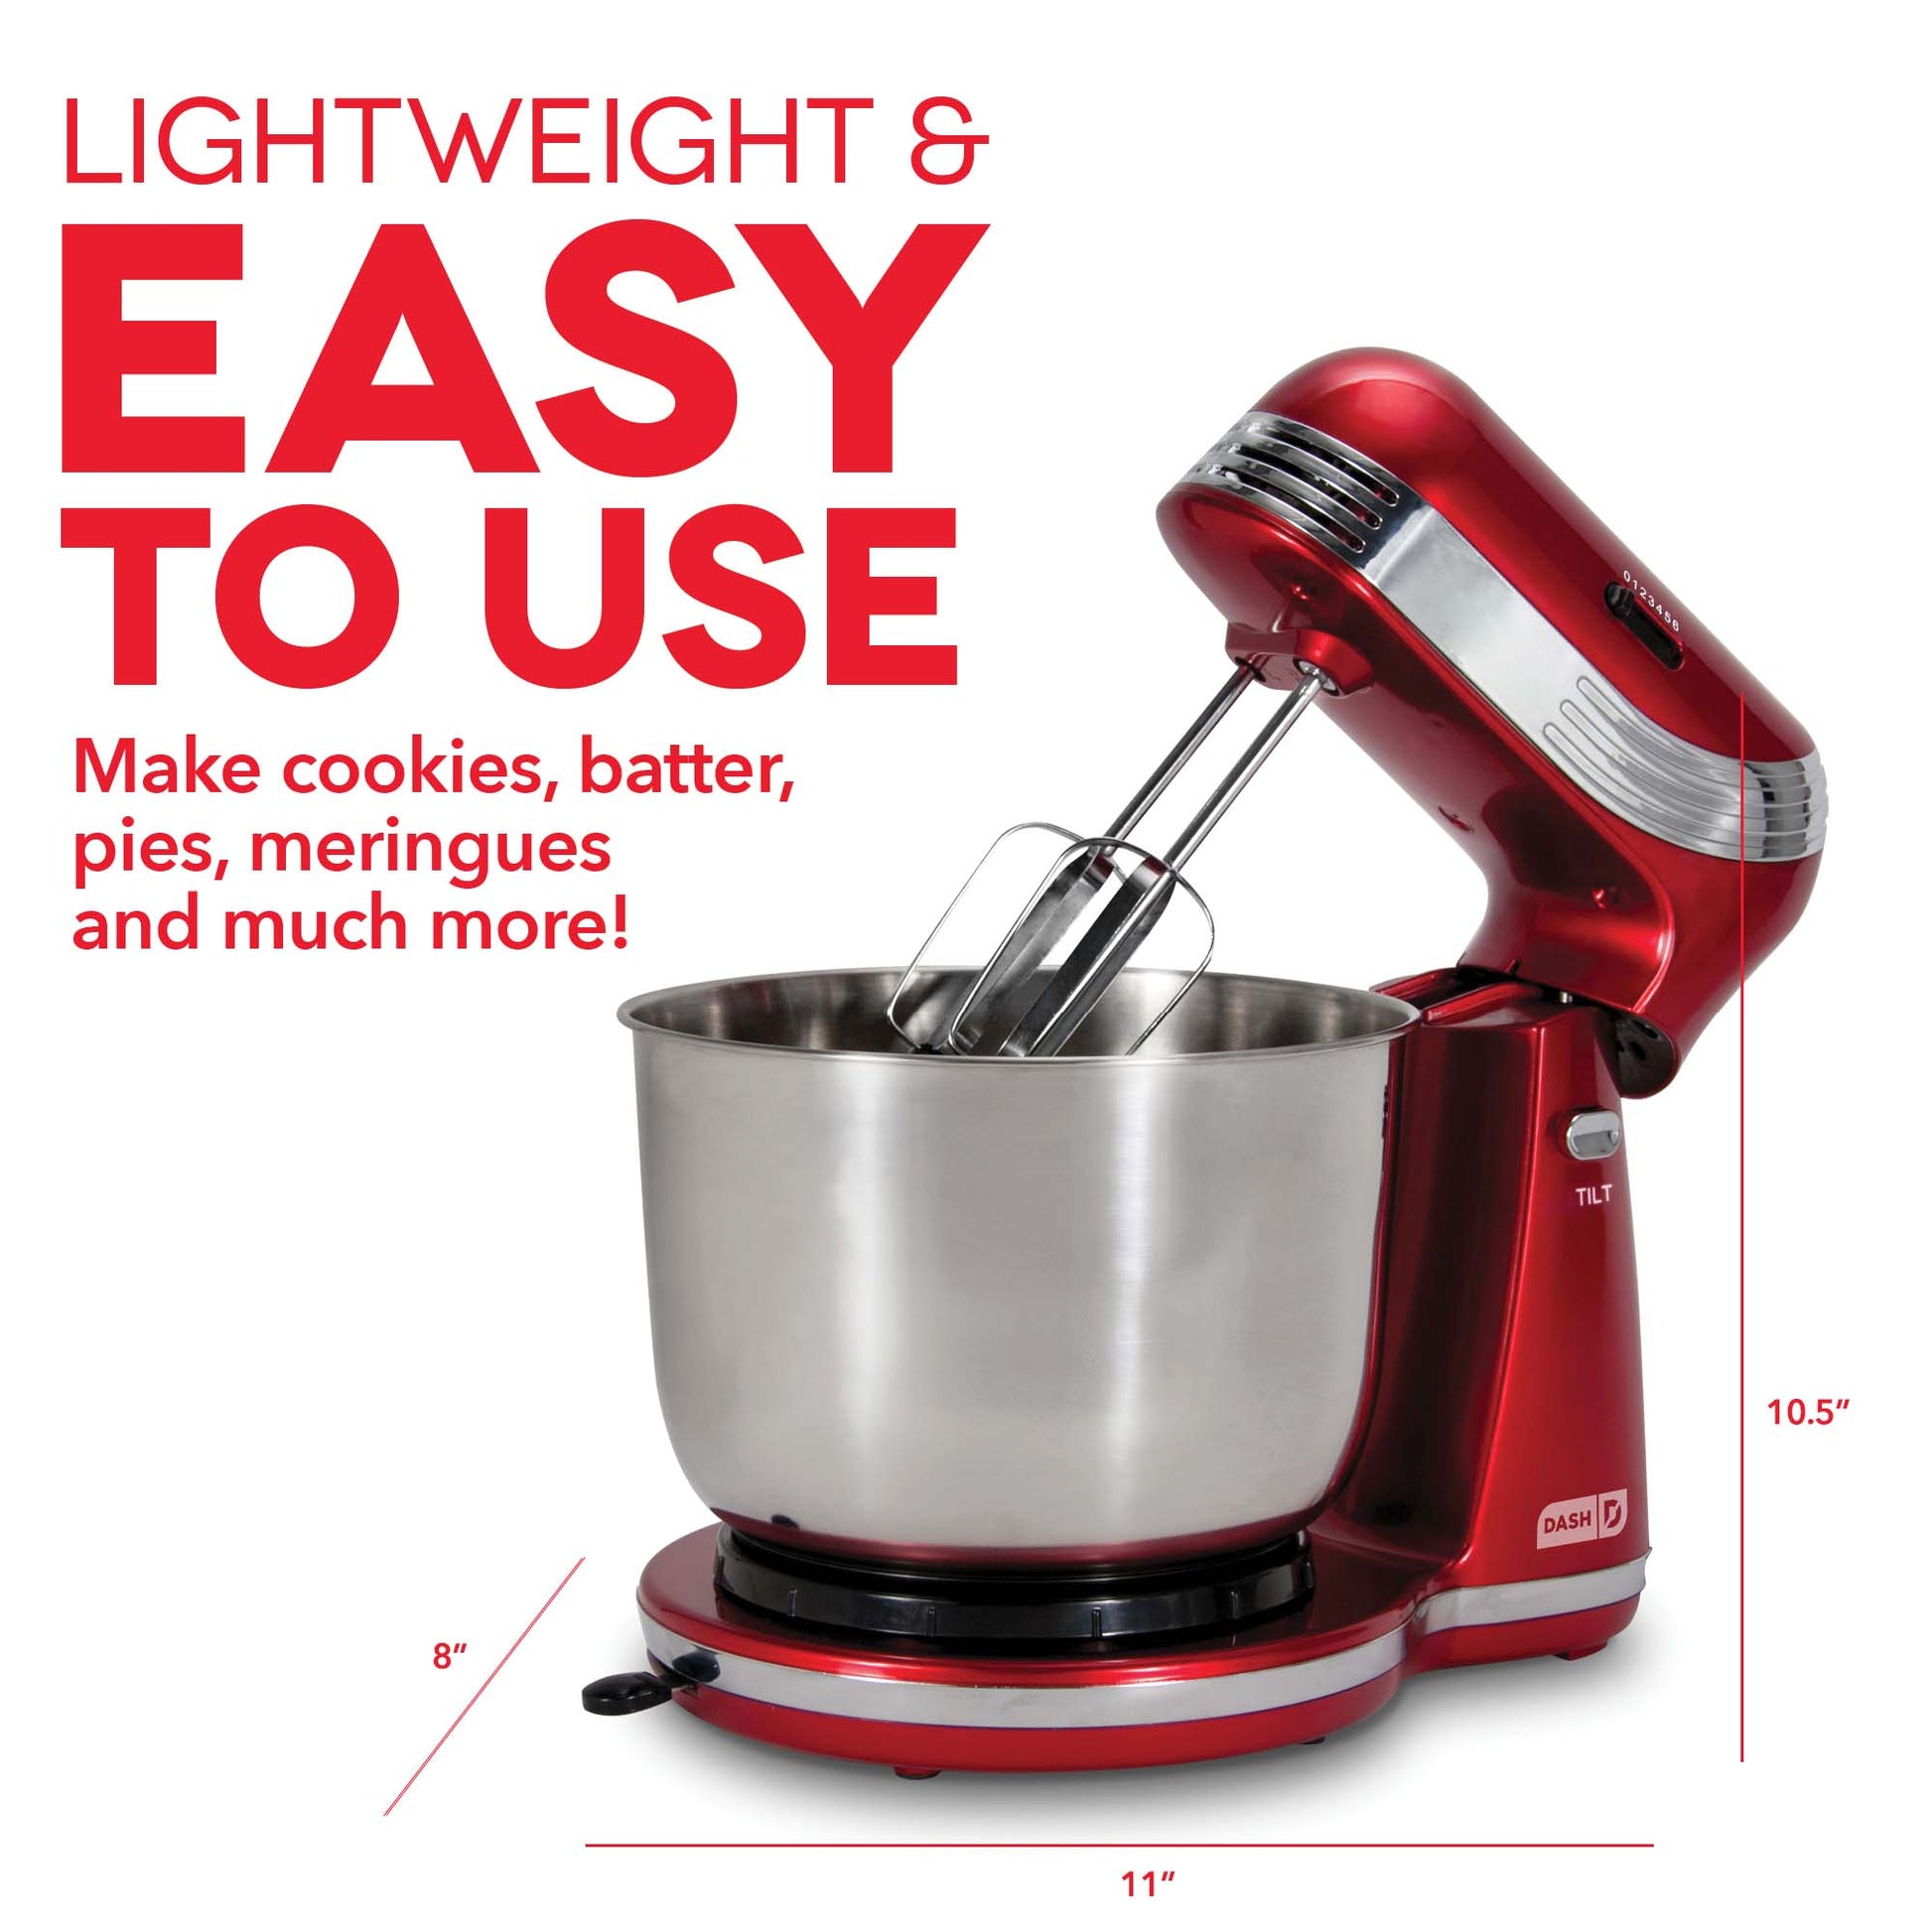 s $50 Dash Stand Mixer Review: Key Insights Before Buying